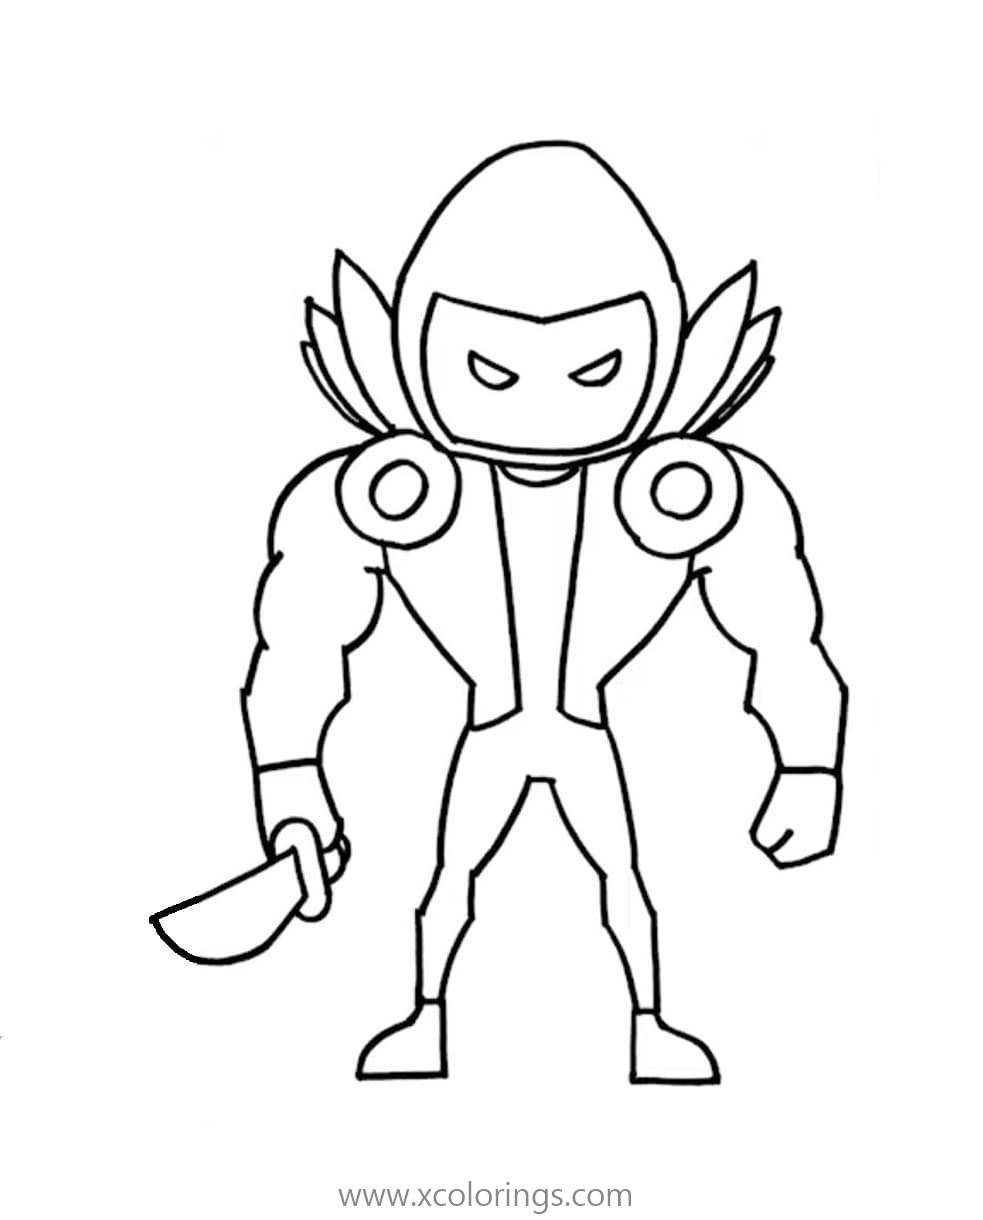 Dominus From Roblox Coloring Pages Xcolorings Com - roblox dominus coloring pages